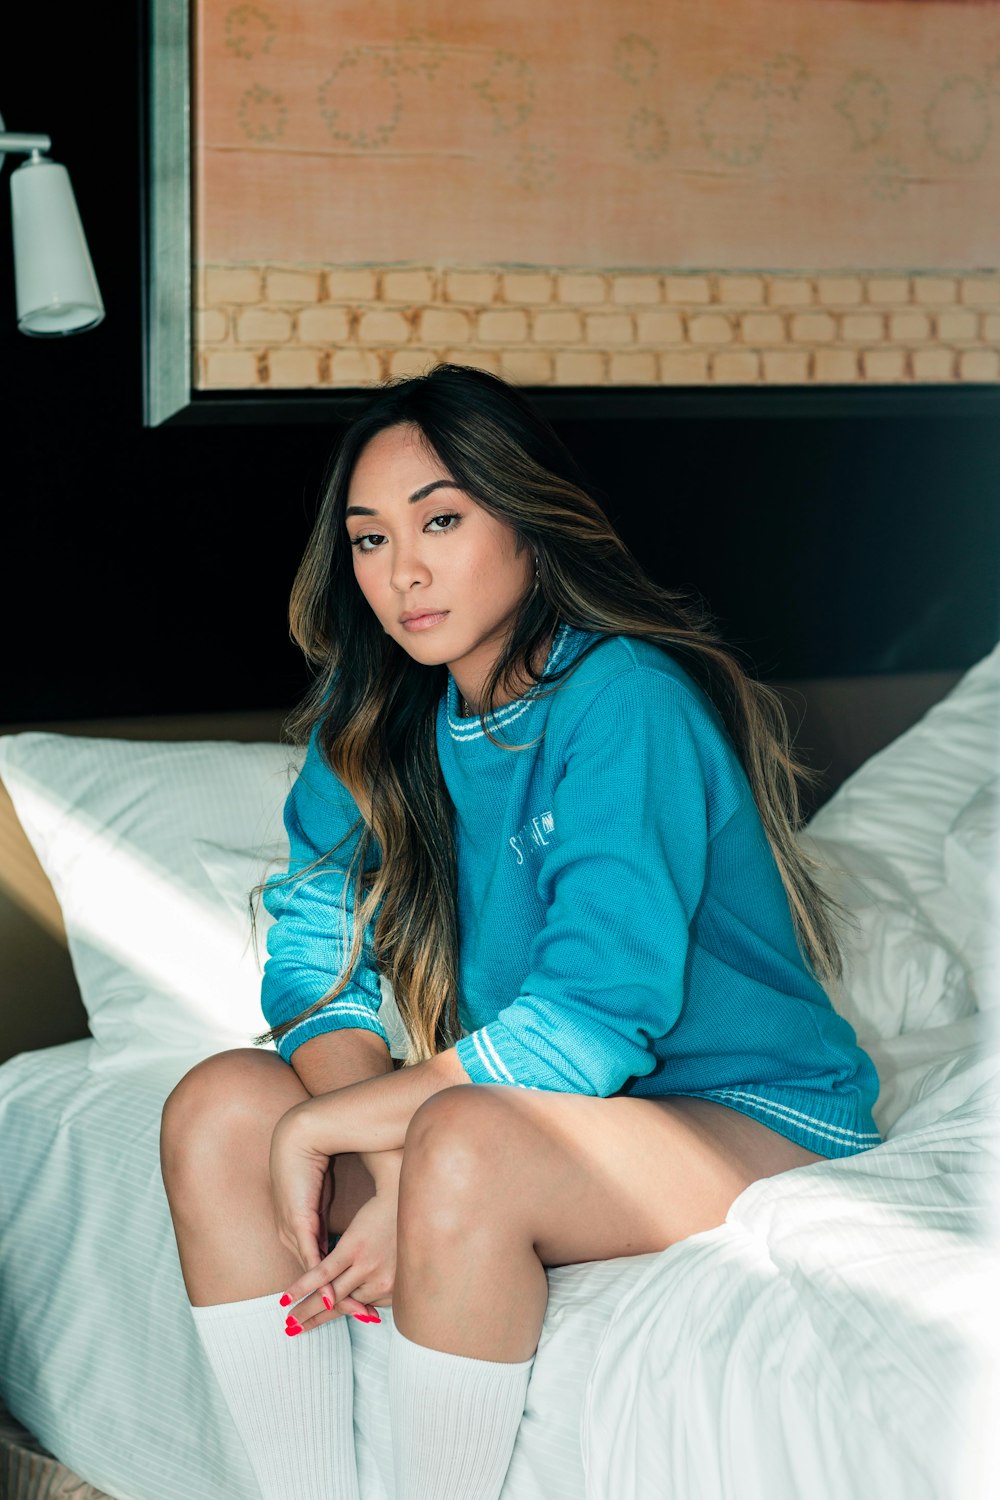 woman wearing blue sweater sitting on bed